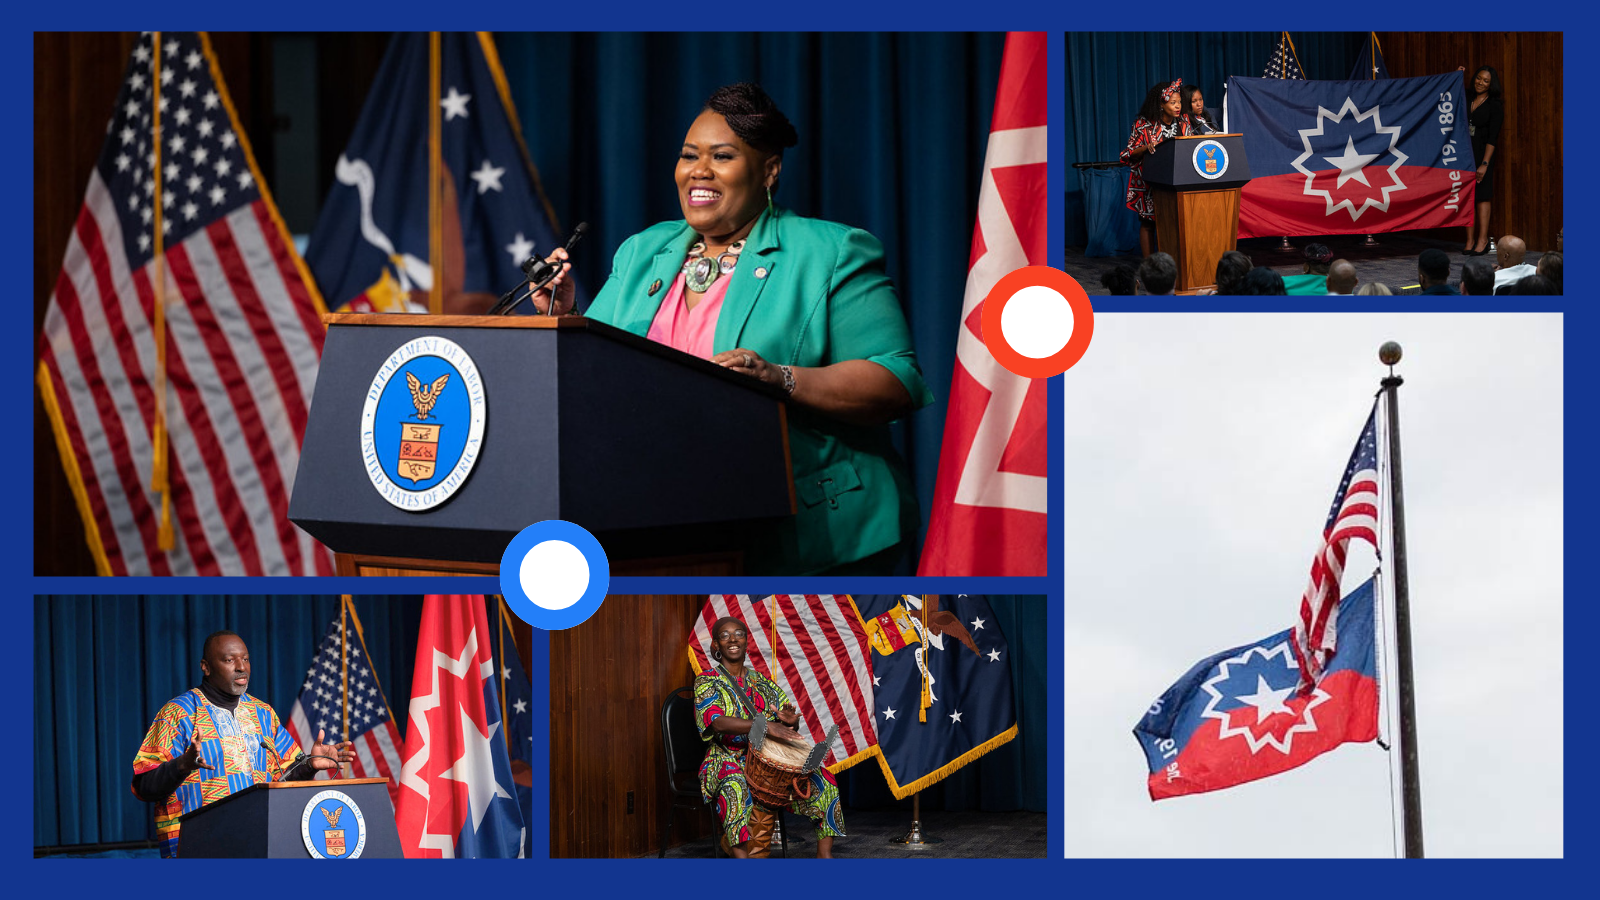 Collage shows several Black workers speaking in front of a podium and the Juneteenth and American flags.